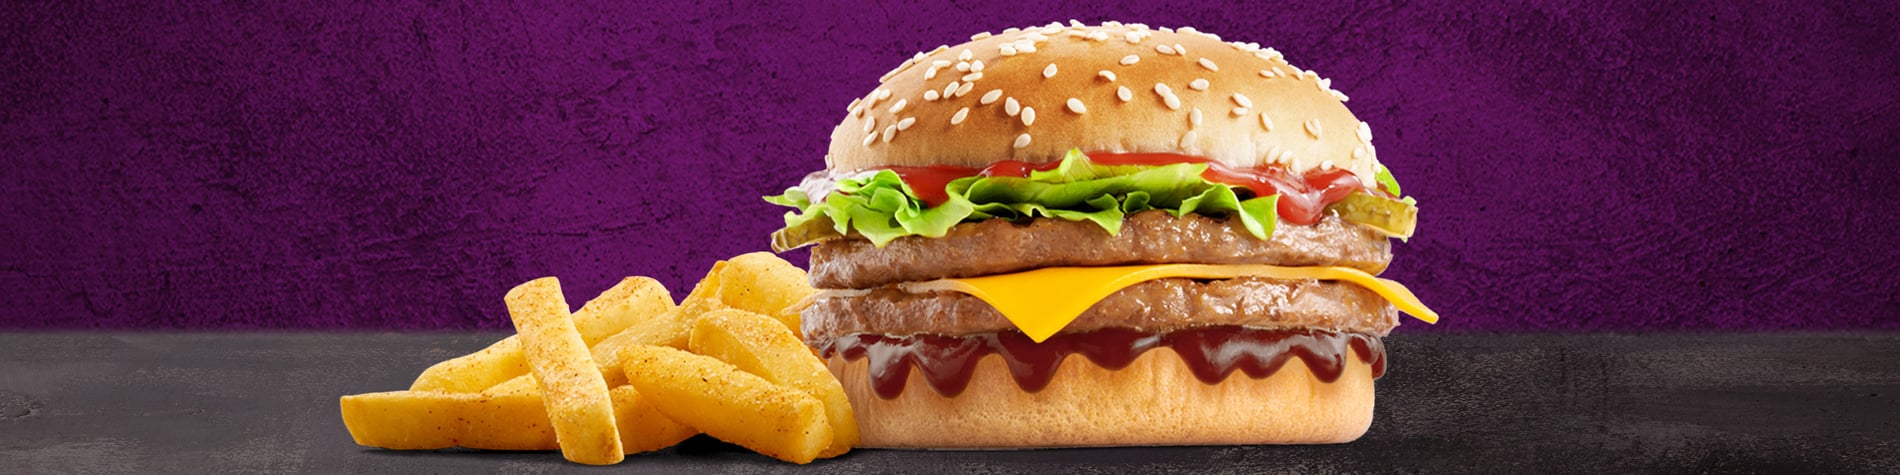 Get the NEW Ya’Vaya™ burger meal. It’s got two 100% beef patties, BBQ Sauce, dills, lettuce, and Cheese with a side of our Famous Hand-Cut chips set against a purple background